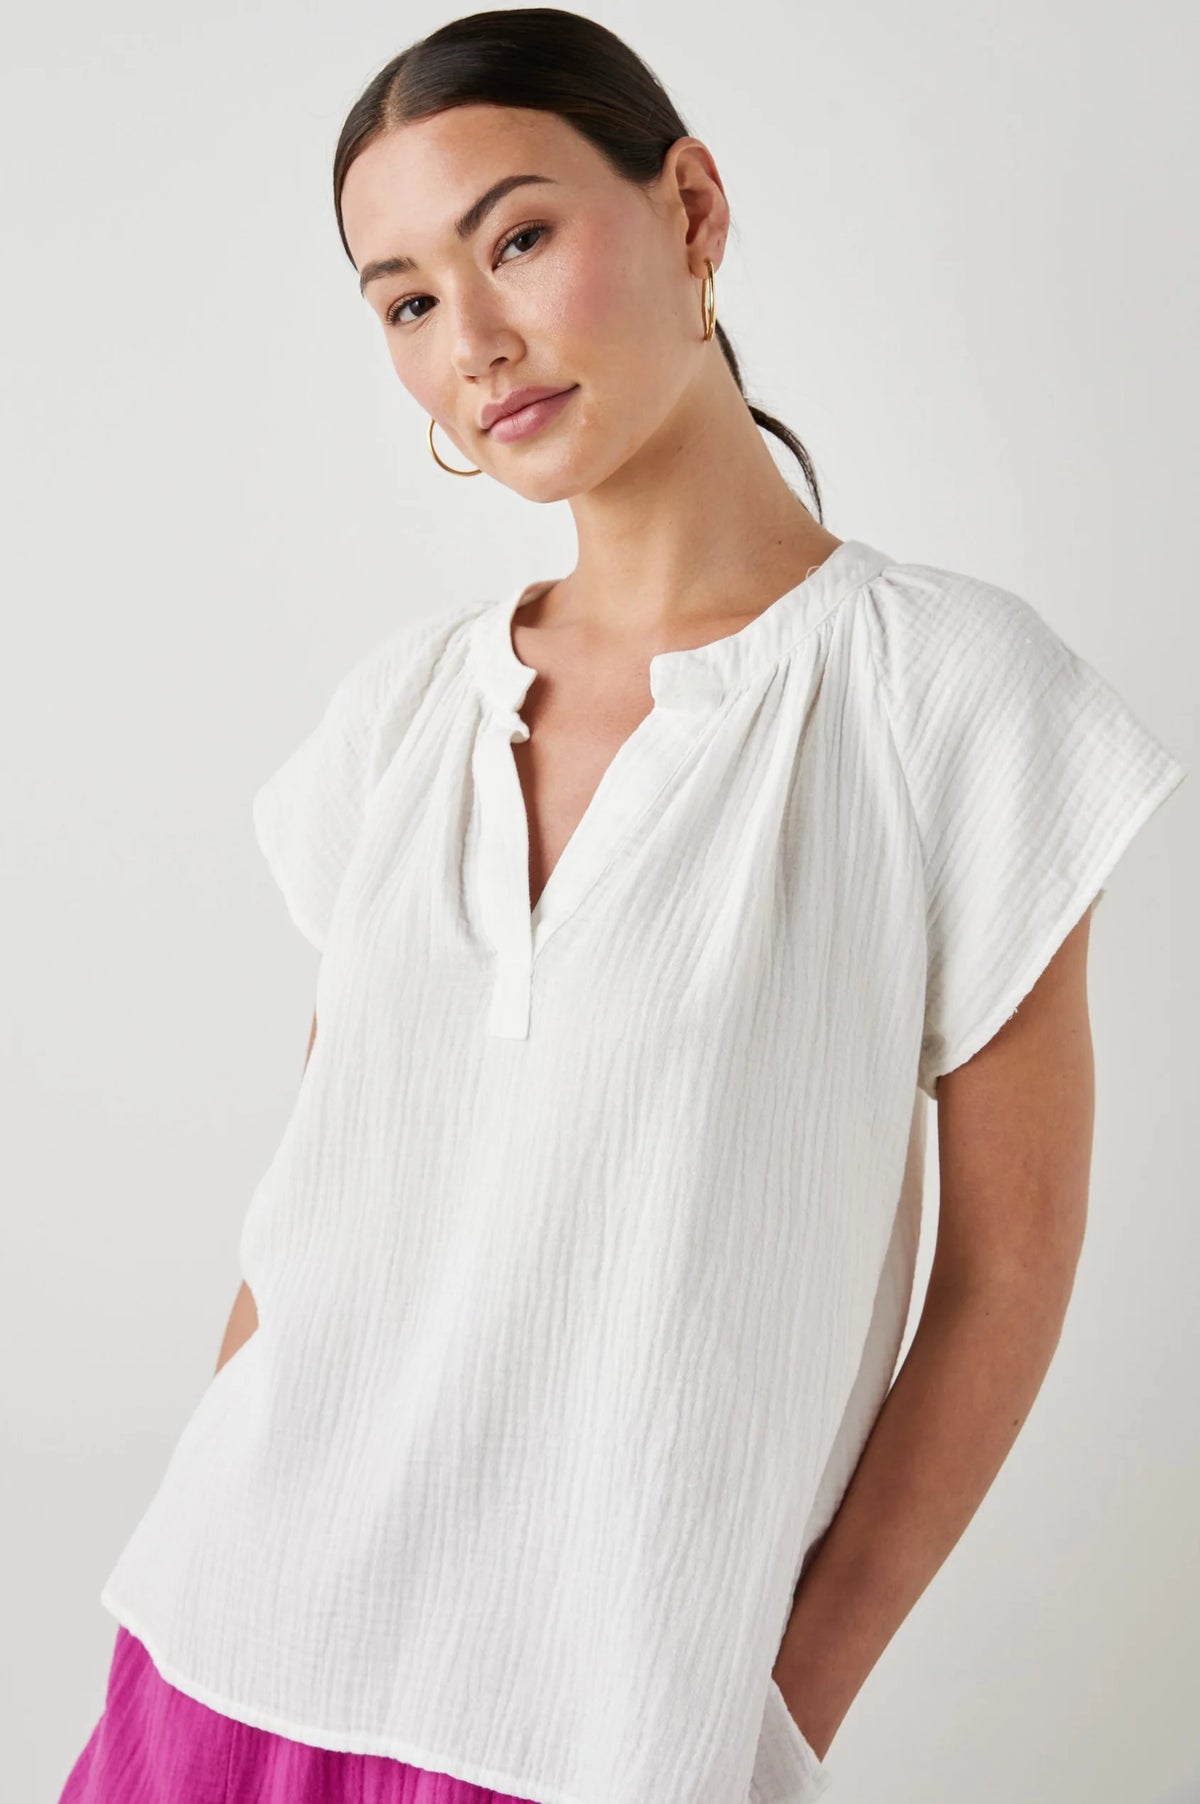 White top in cheese cloth fabric with capped sleeves and a notch neck